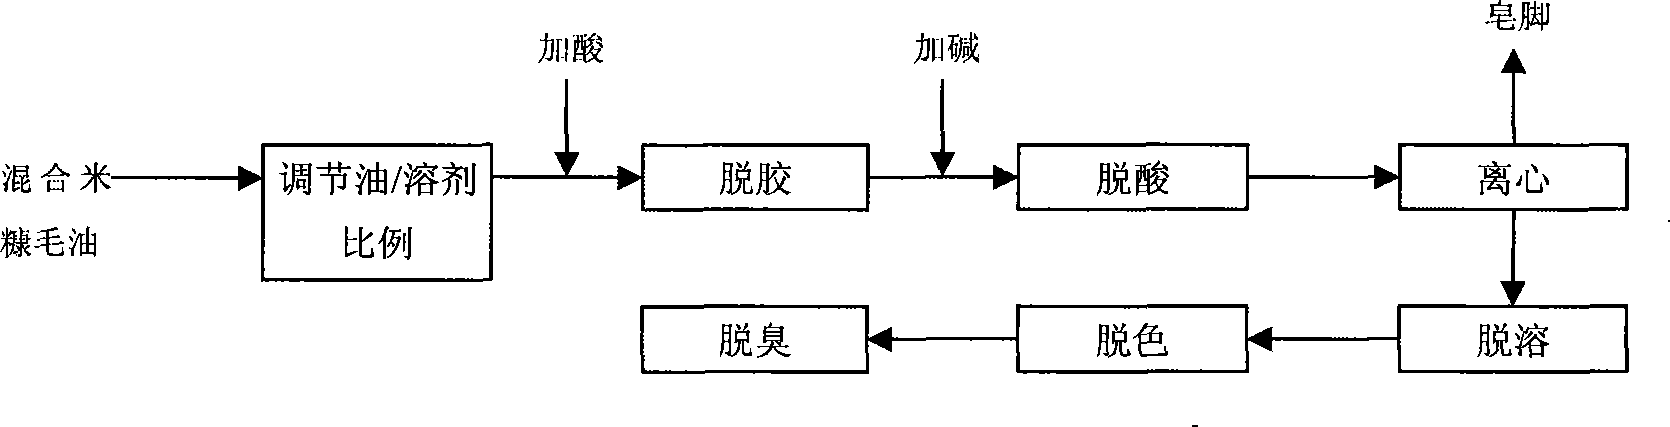 Method for refining rice bran oil by mixing crude rice bran oil refining technique